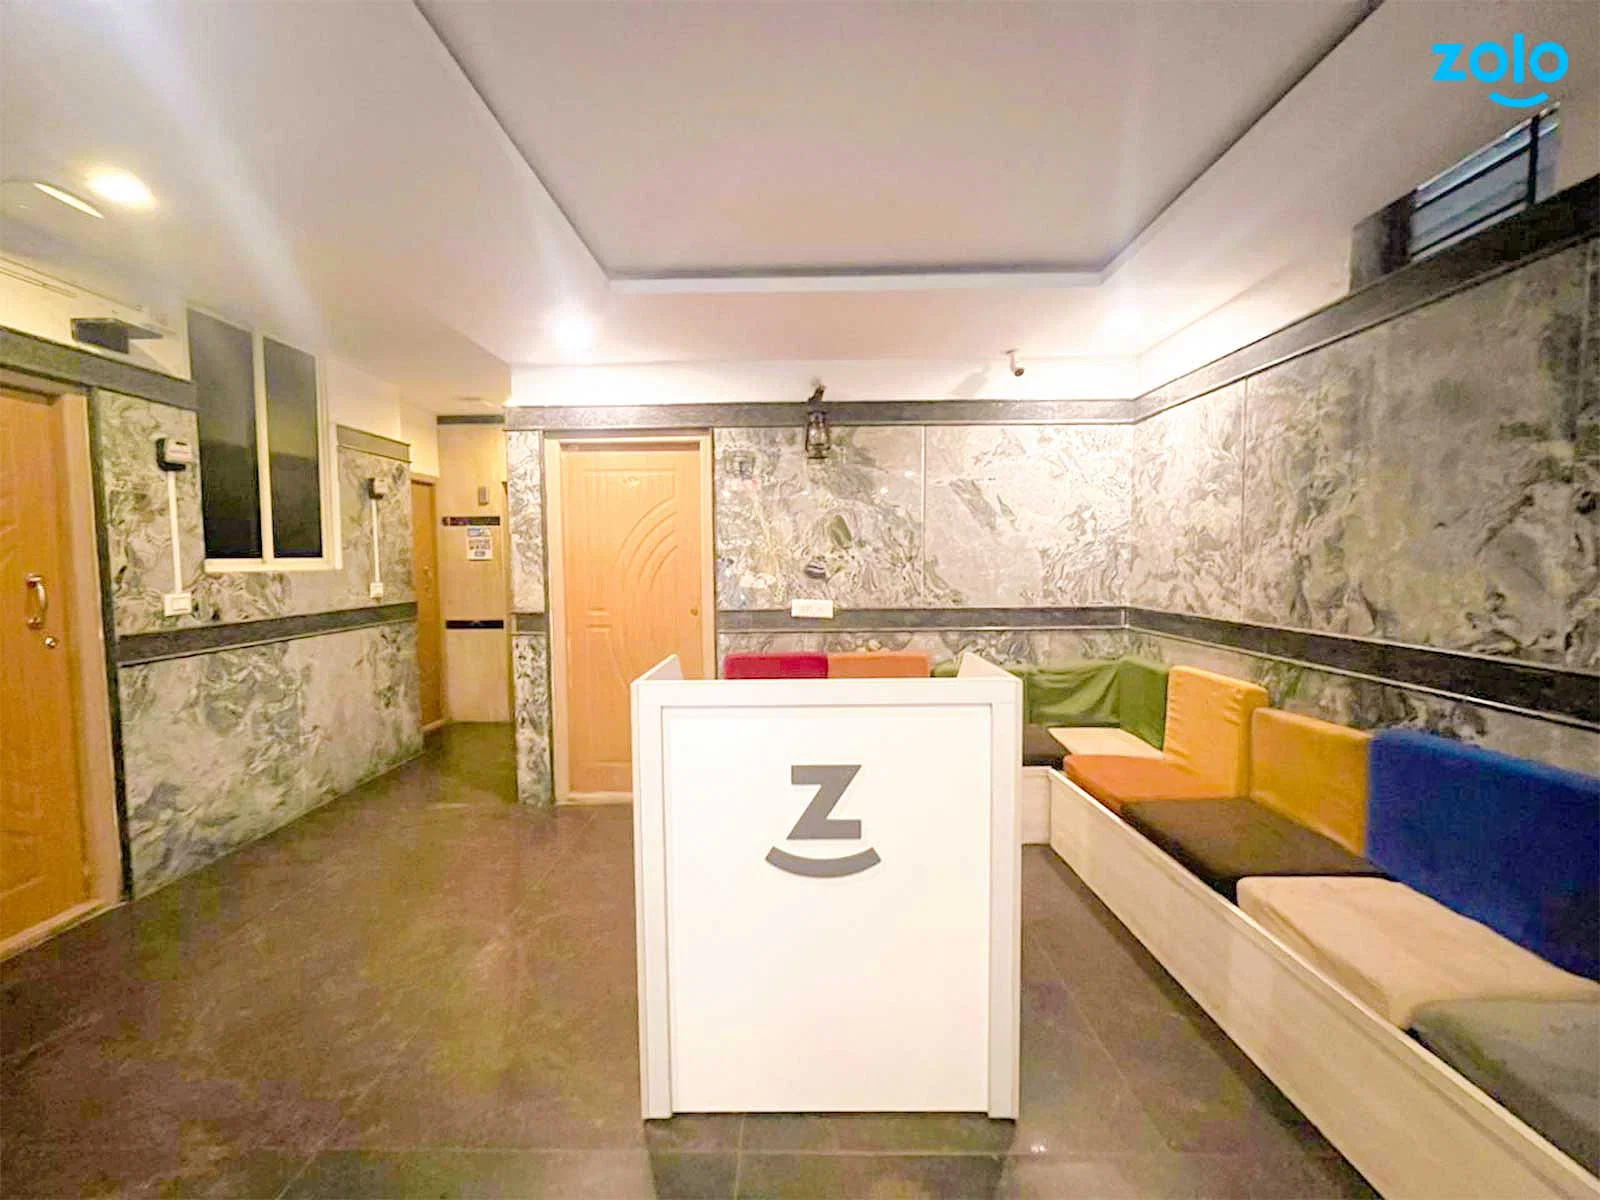 safe and affordable hostels for unisex students with 24/7 security and CCTV surveillance-Zolo Highstreet J